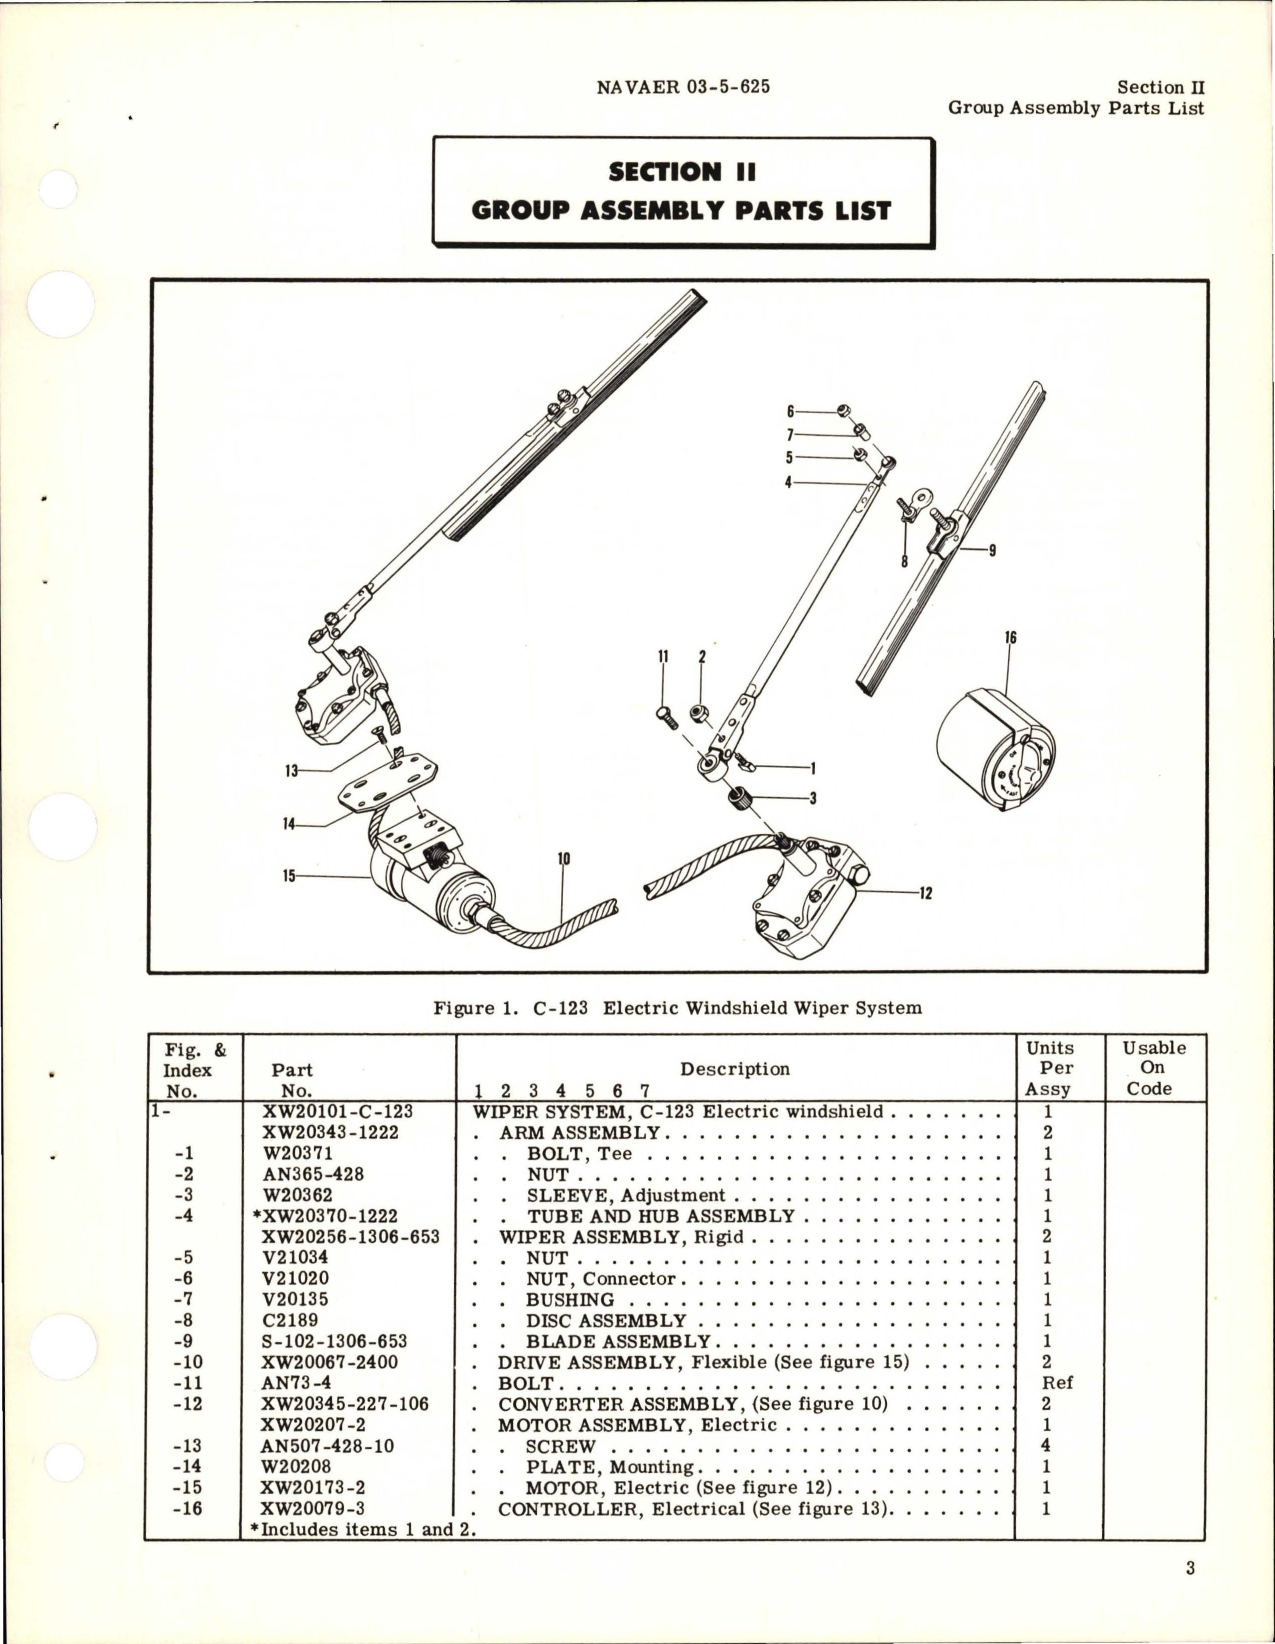 Sample page 5 from AirCorps Library document: Illustrated Parts Breakdown for Electric Windshield Wiper System 